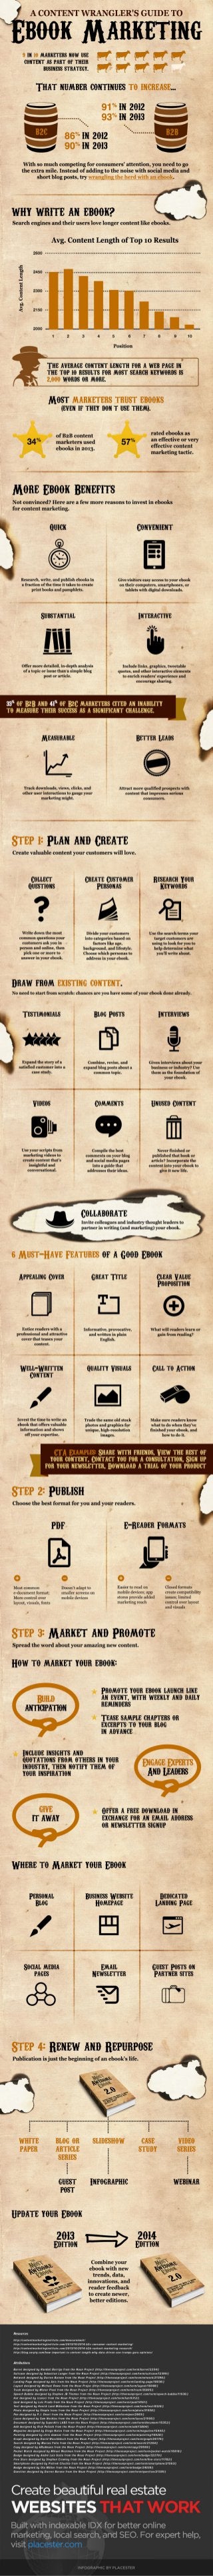 The Content Wranglers Guide to Ebook Marketing